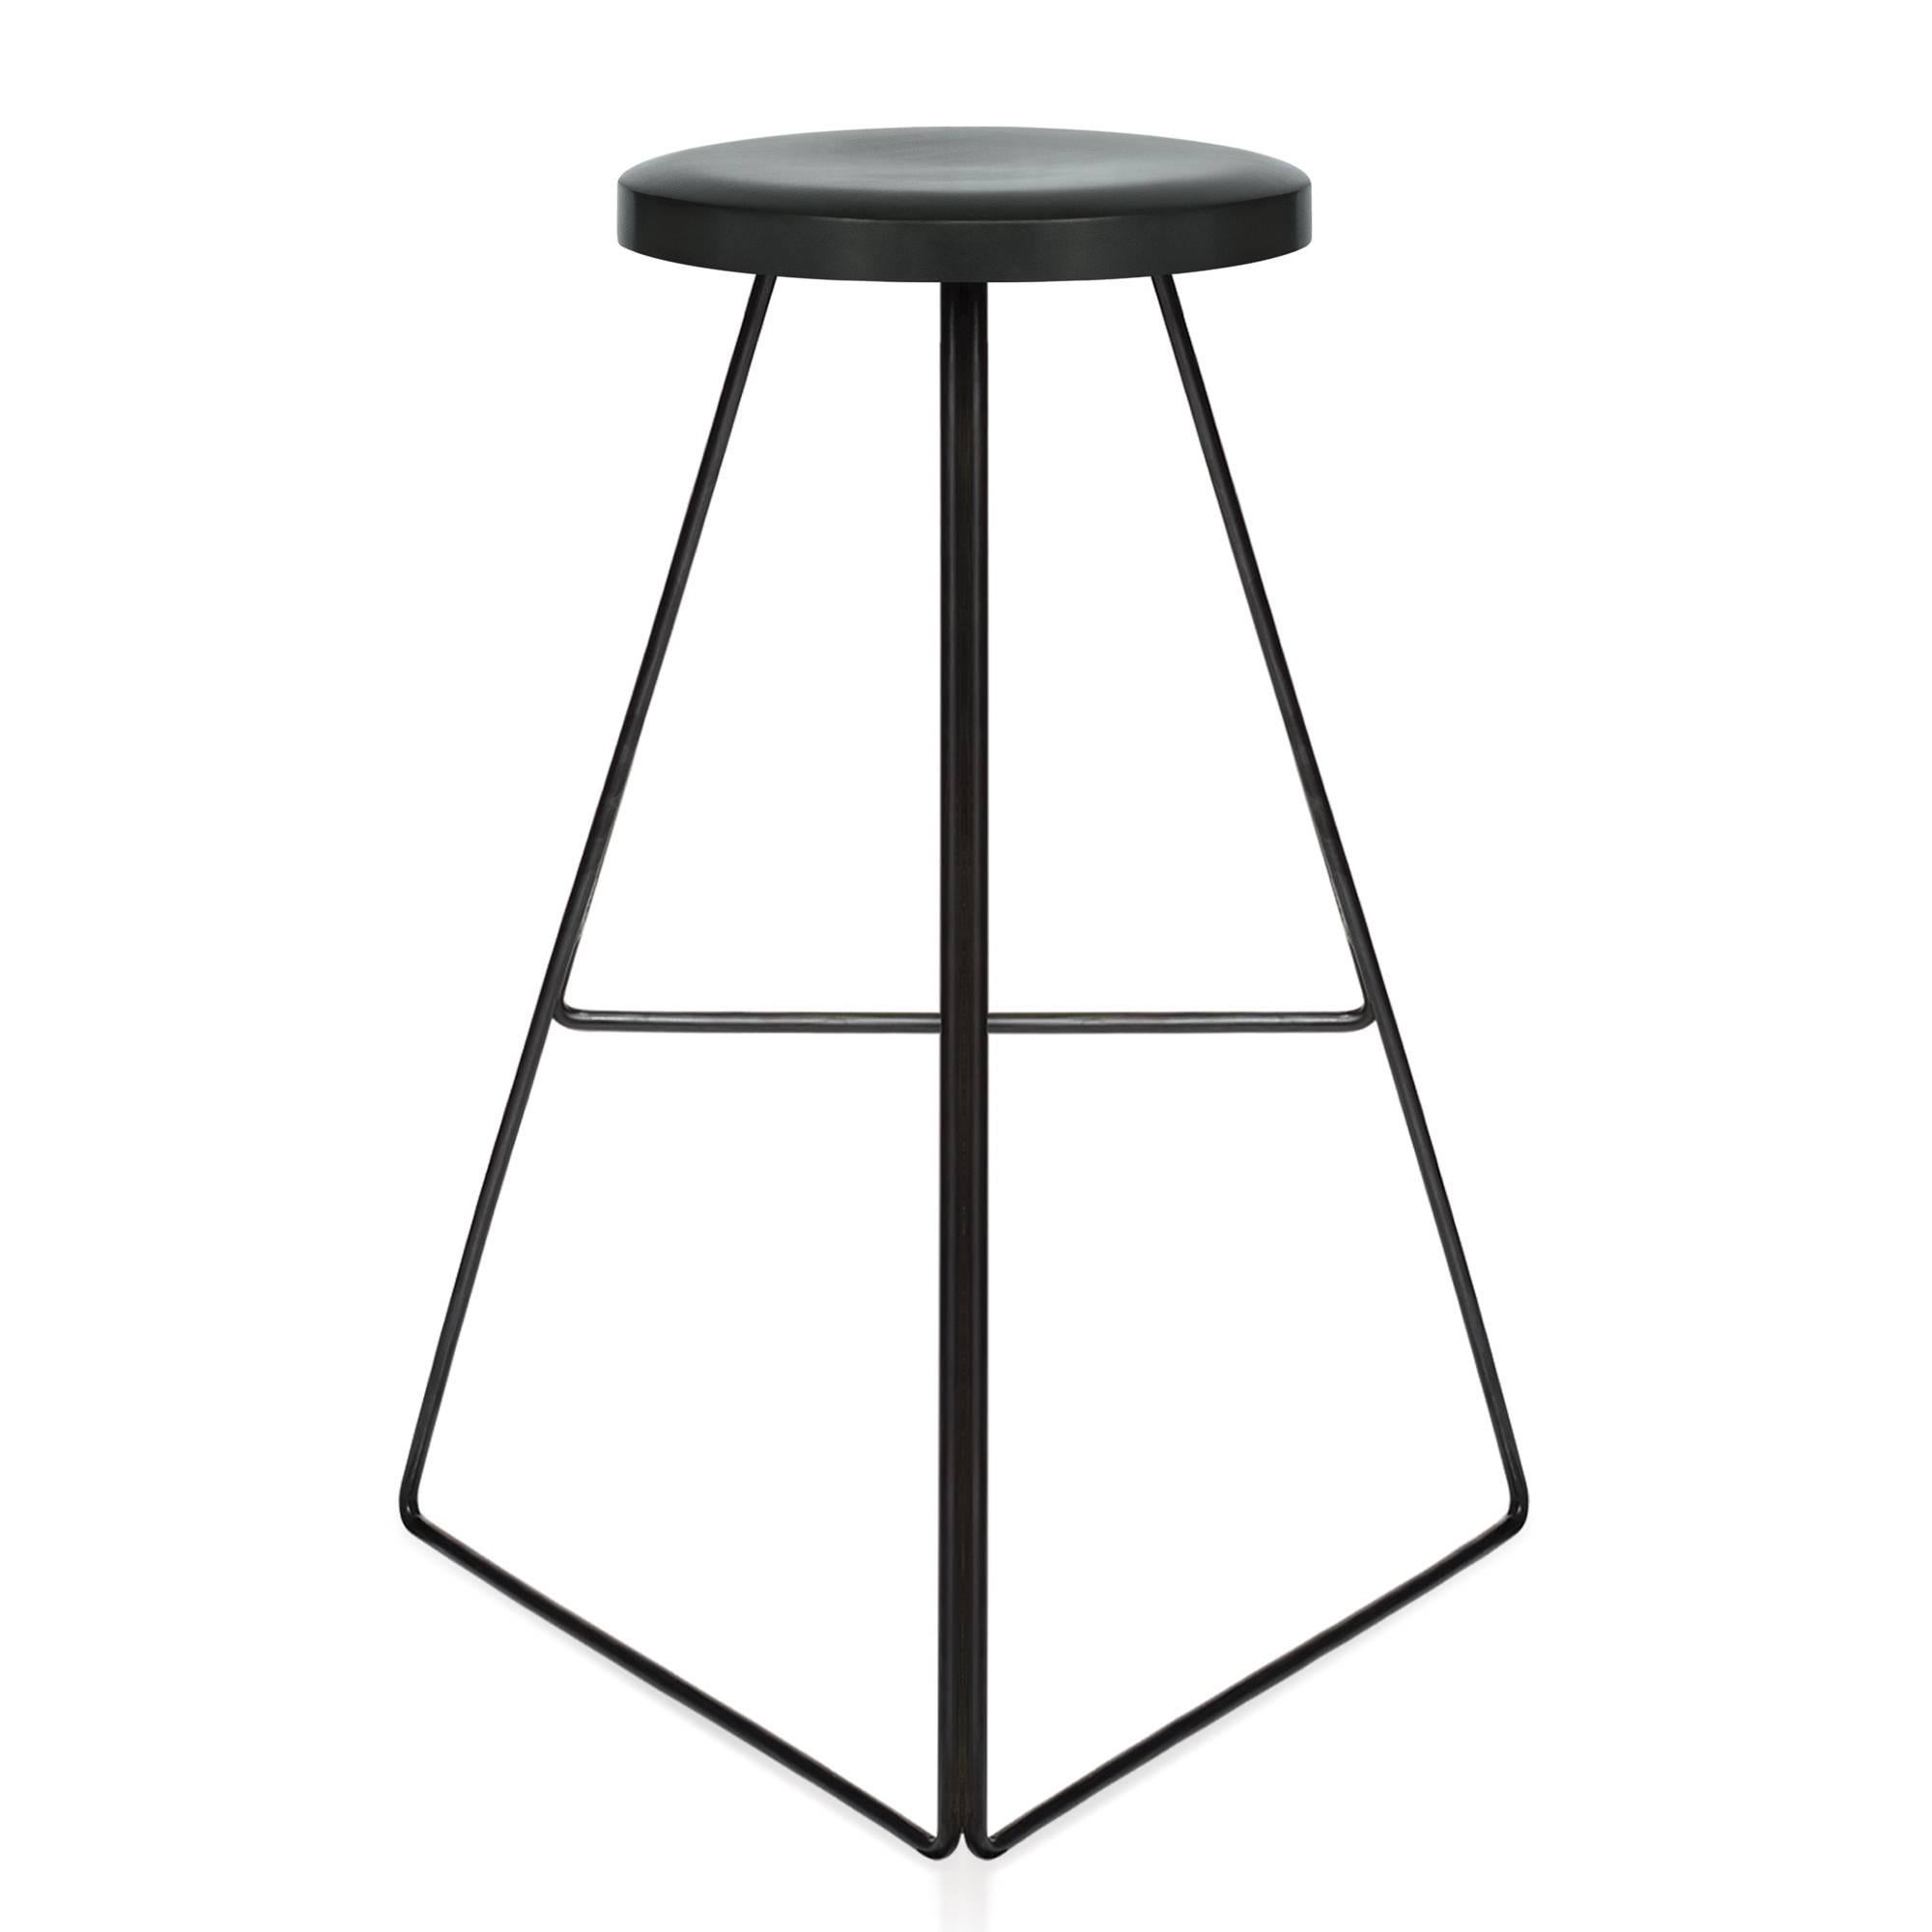 Powder-Coated The Coleman Stool. Black & Charcoal, Bar Height. 54 Variations in Color & Height For Sale